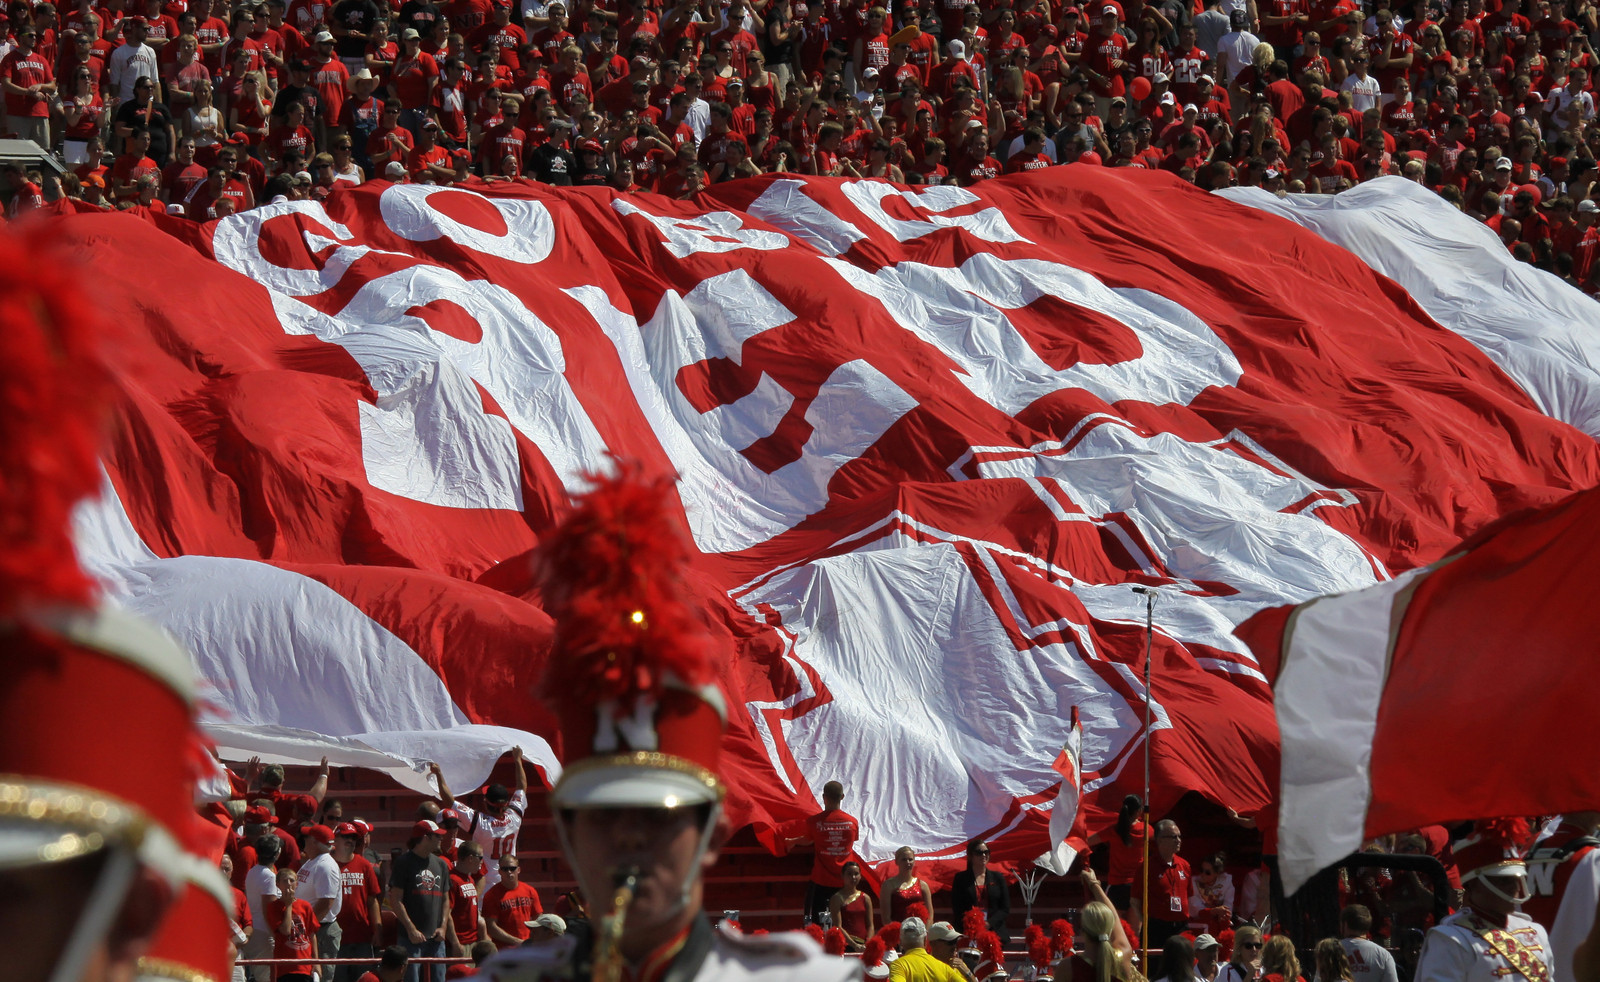 Ready for some football? Husker tickets are available.